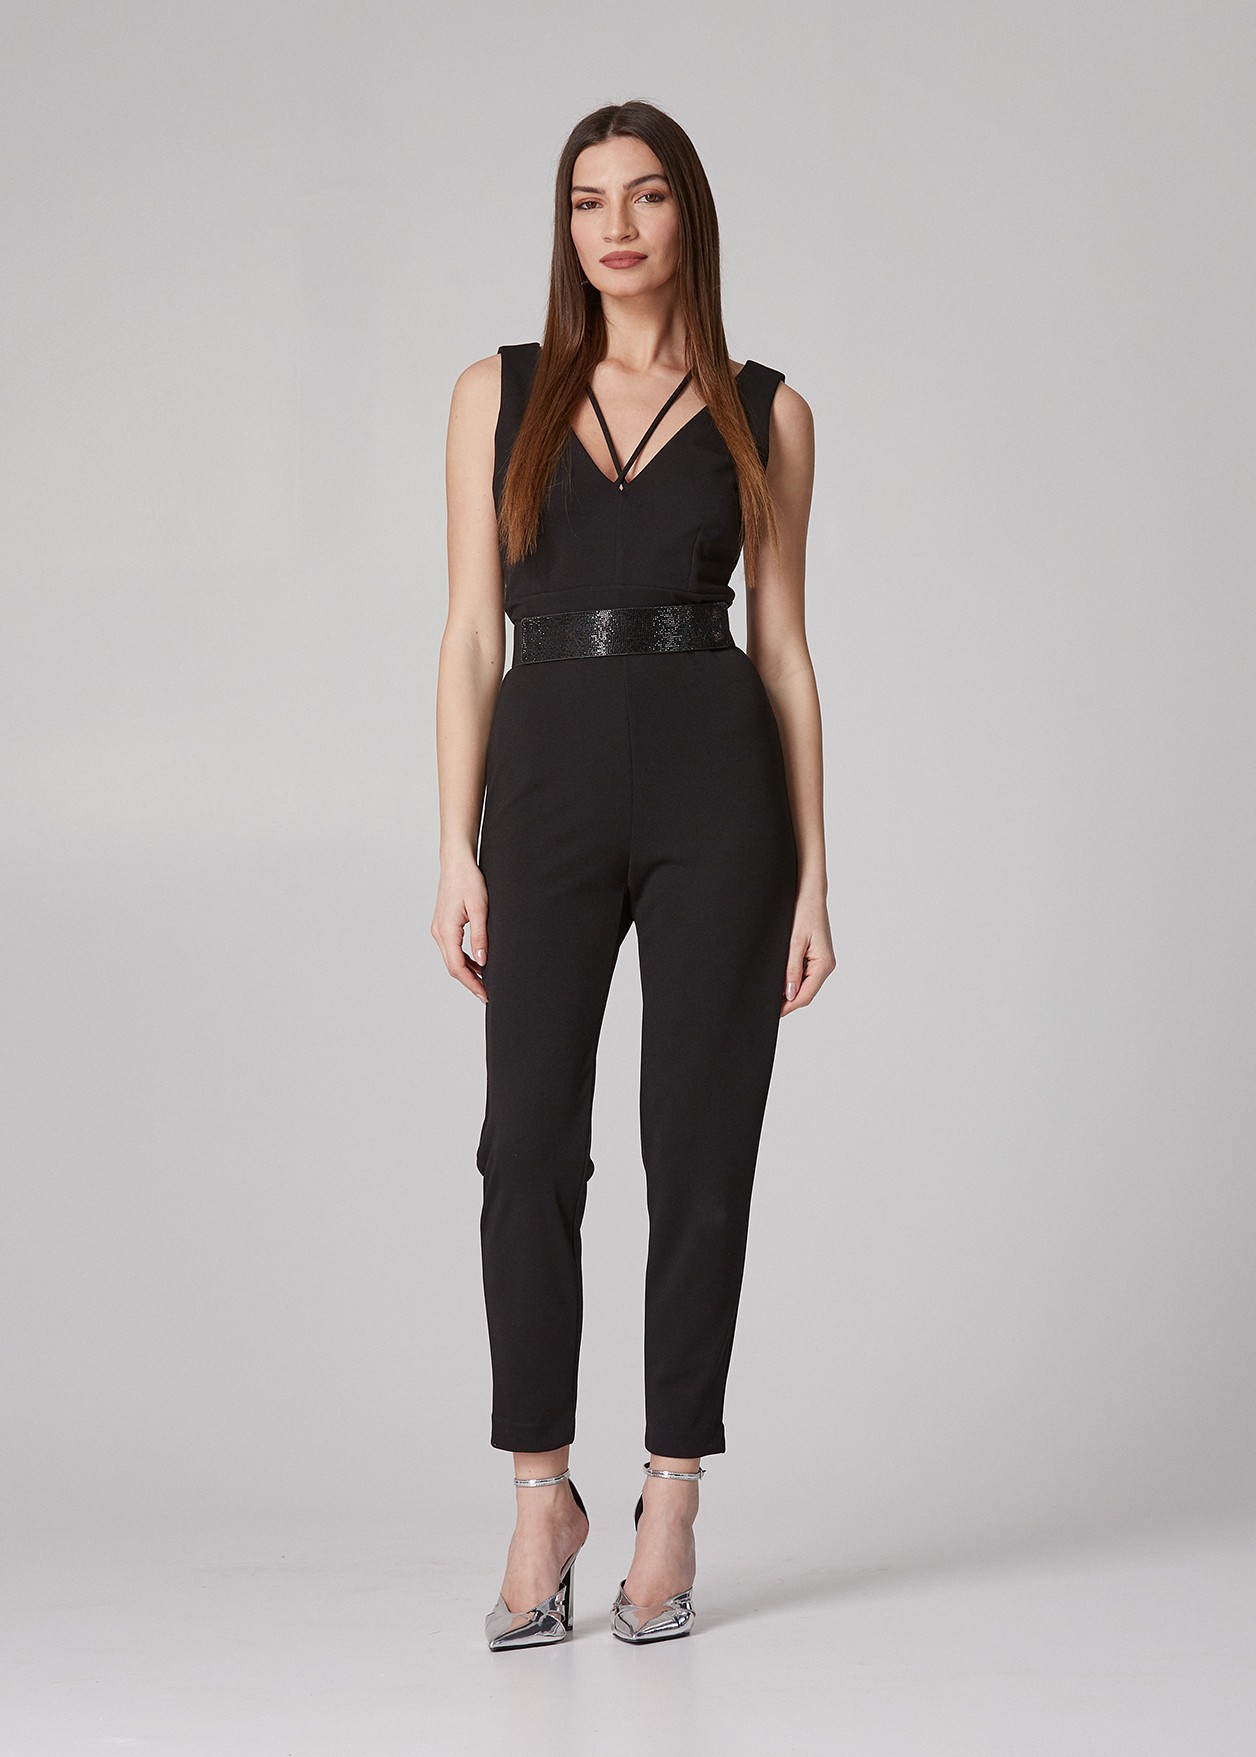 Jumpsuit with detail on the neck